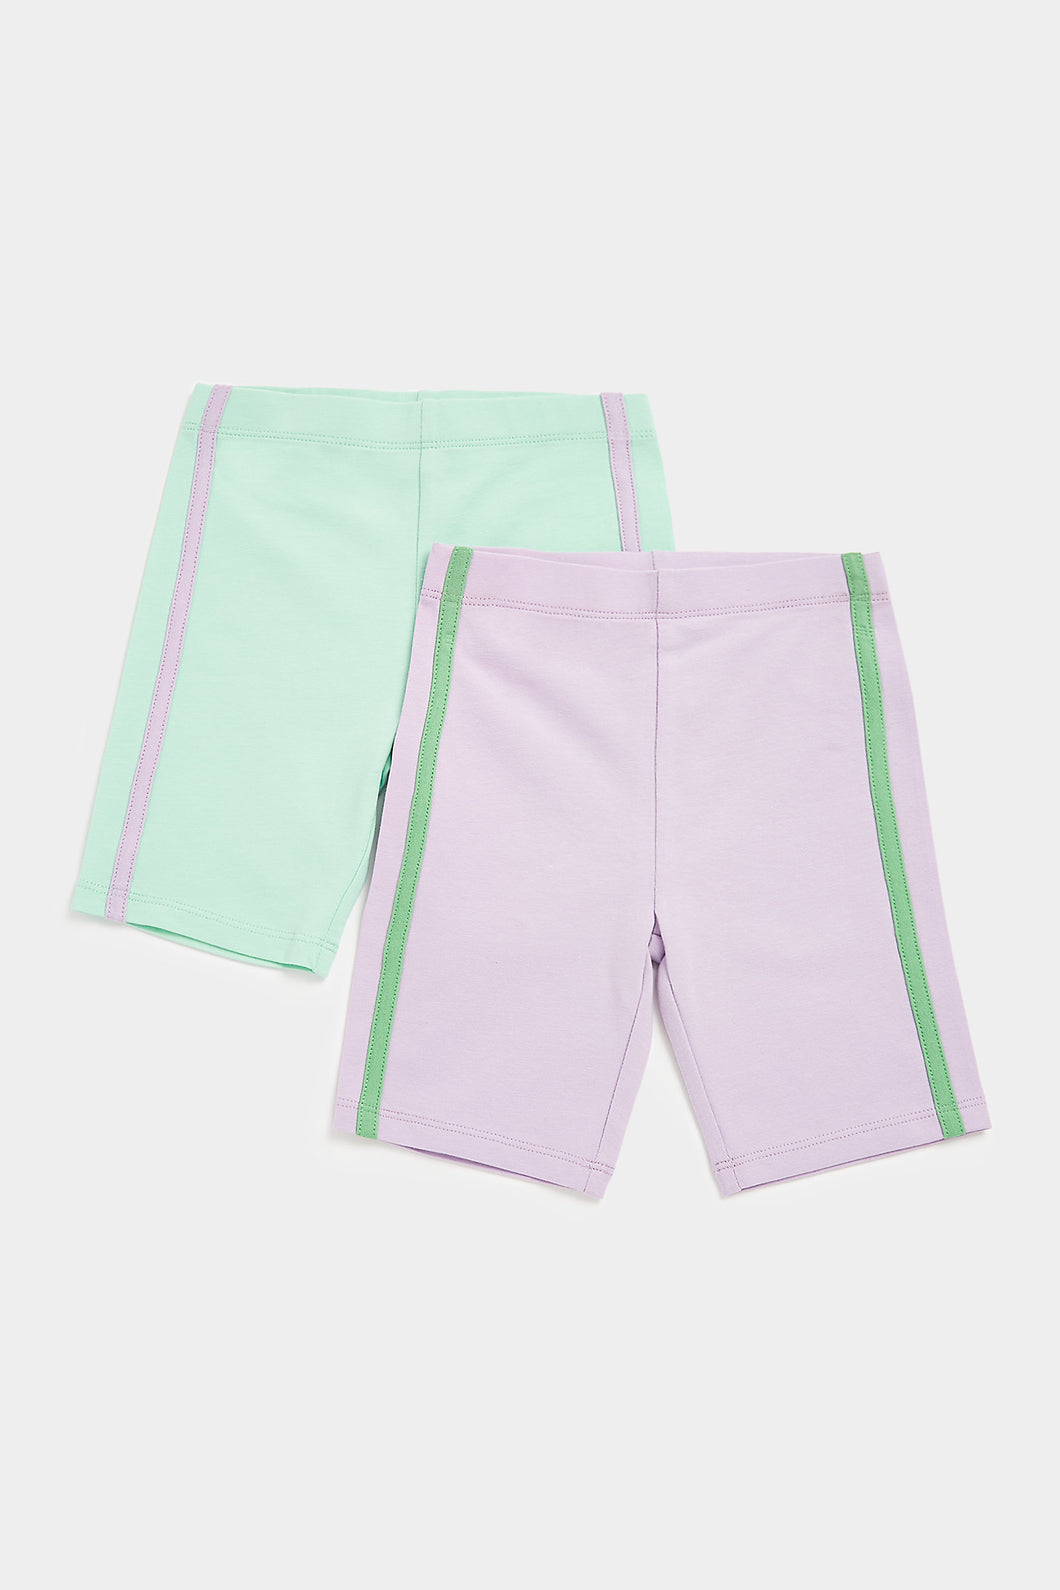 Mothercare Cycle Shorts - 2 Pack